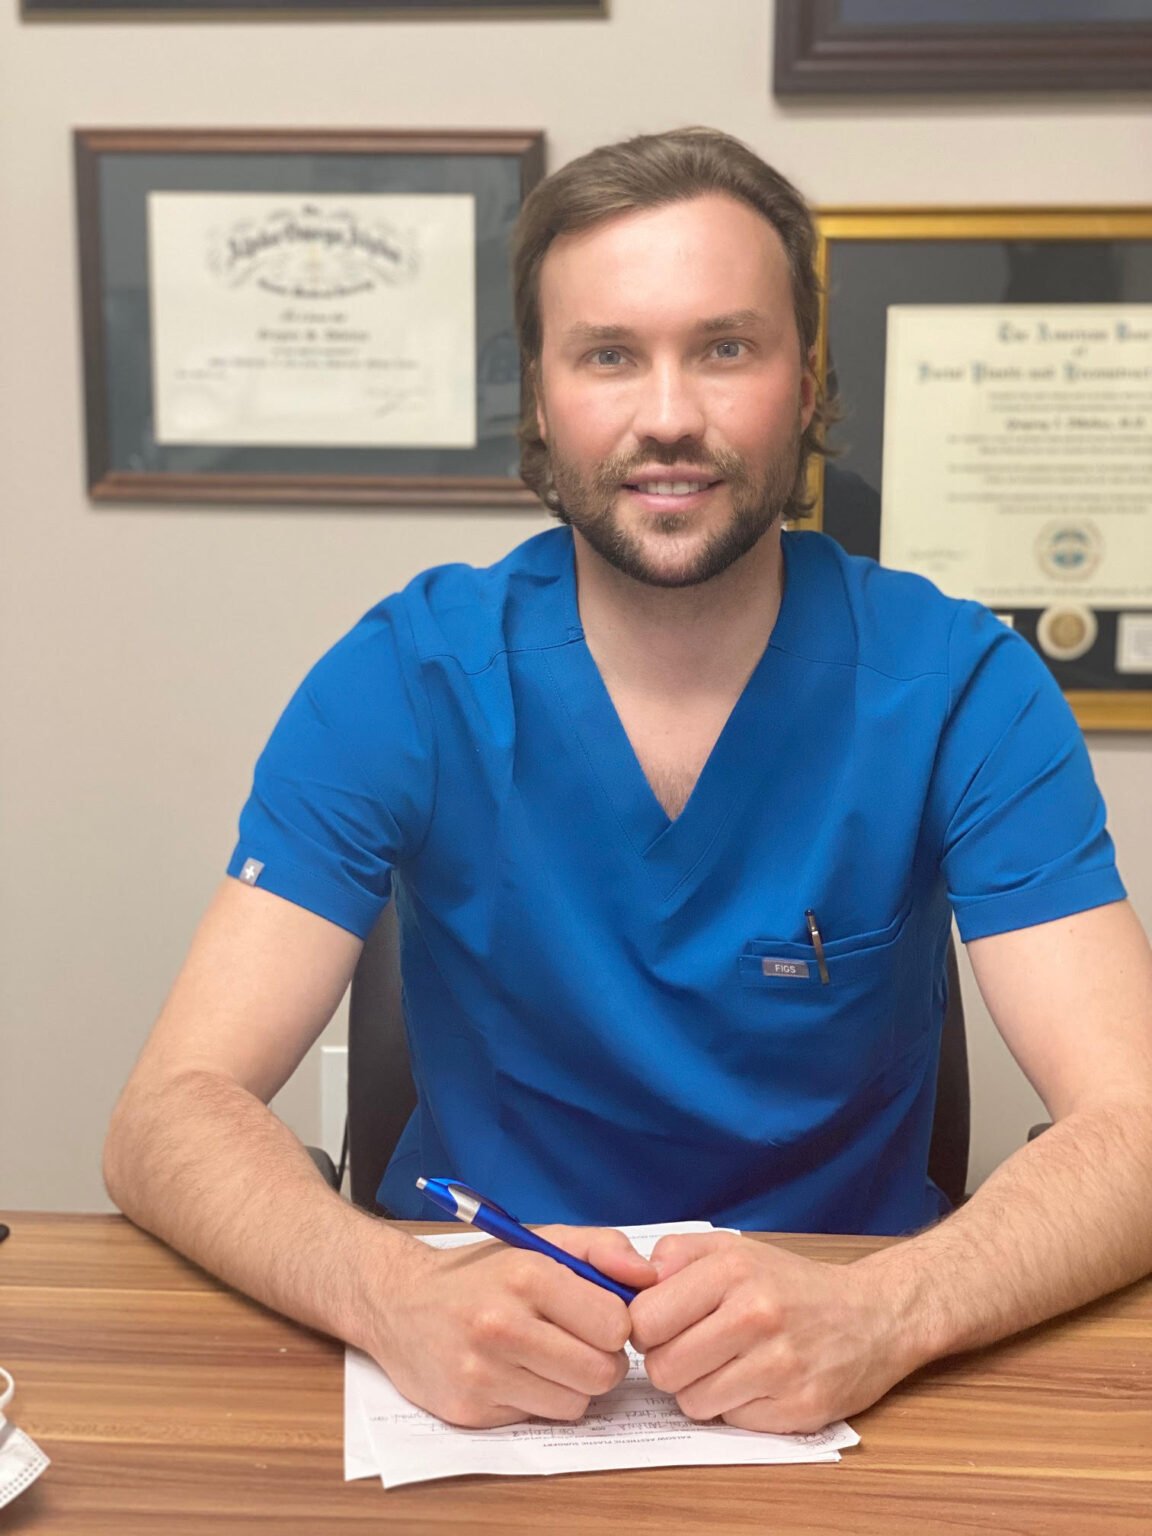 This young plastic surgeon is already making a name for himself! Learn more about Dr. Sergei Kalsow's life work and his fast-growing surgery company here.